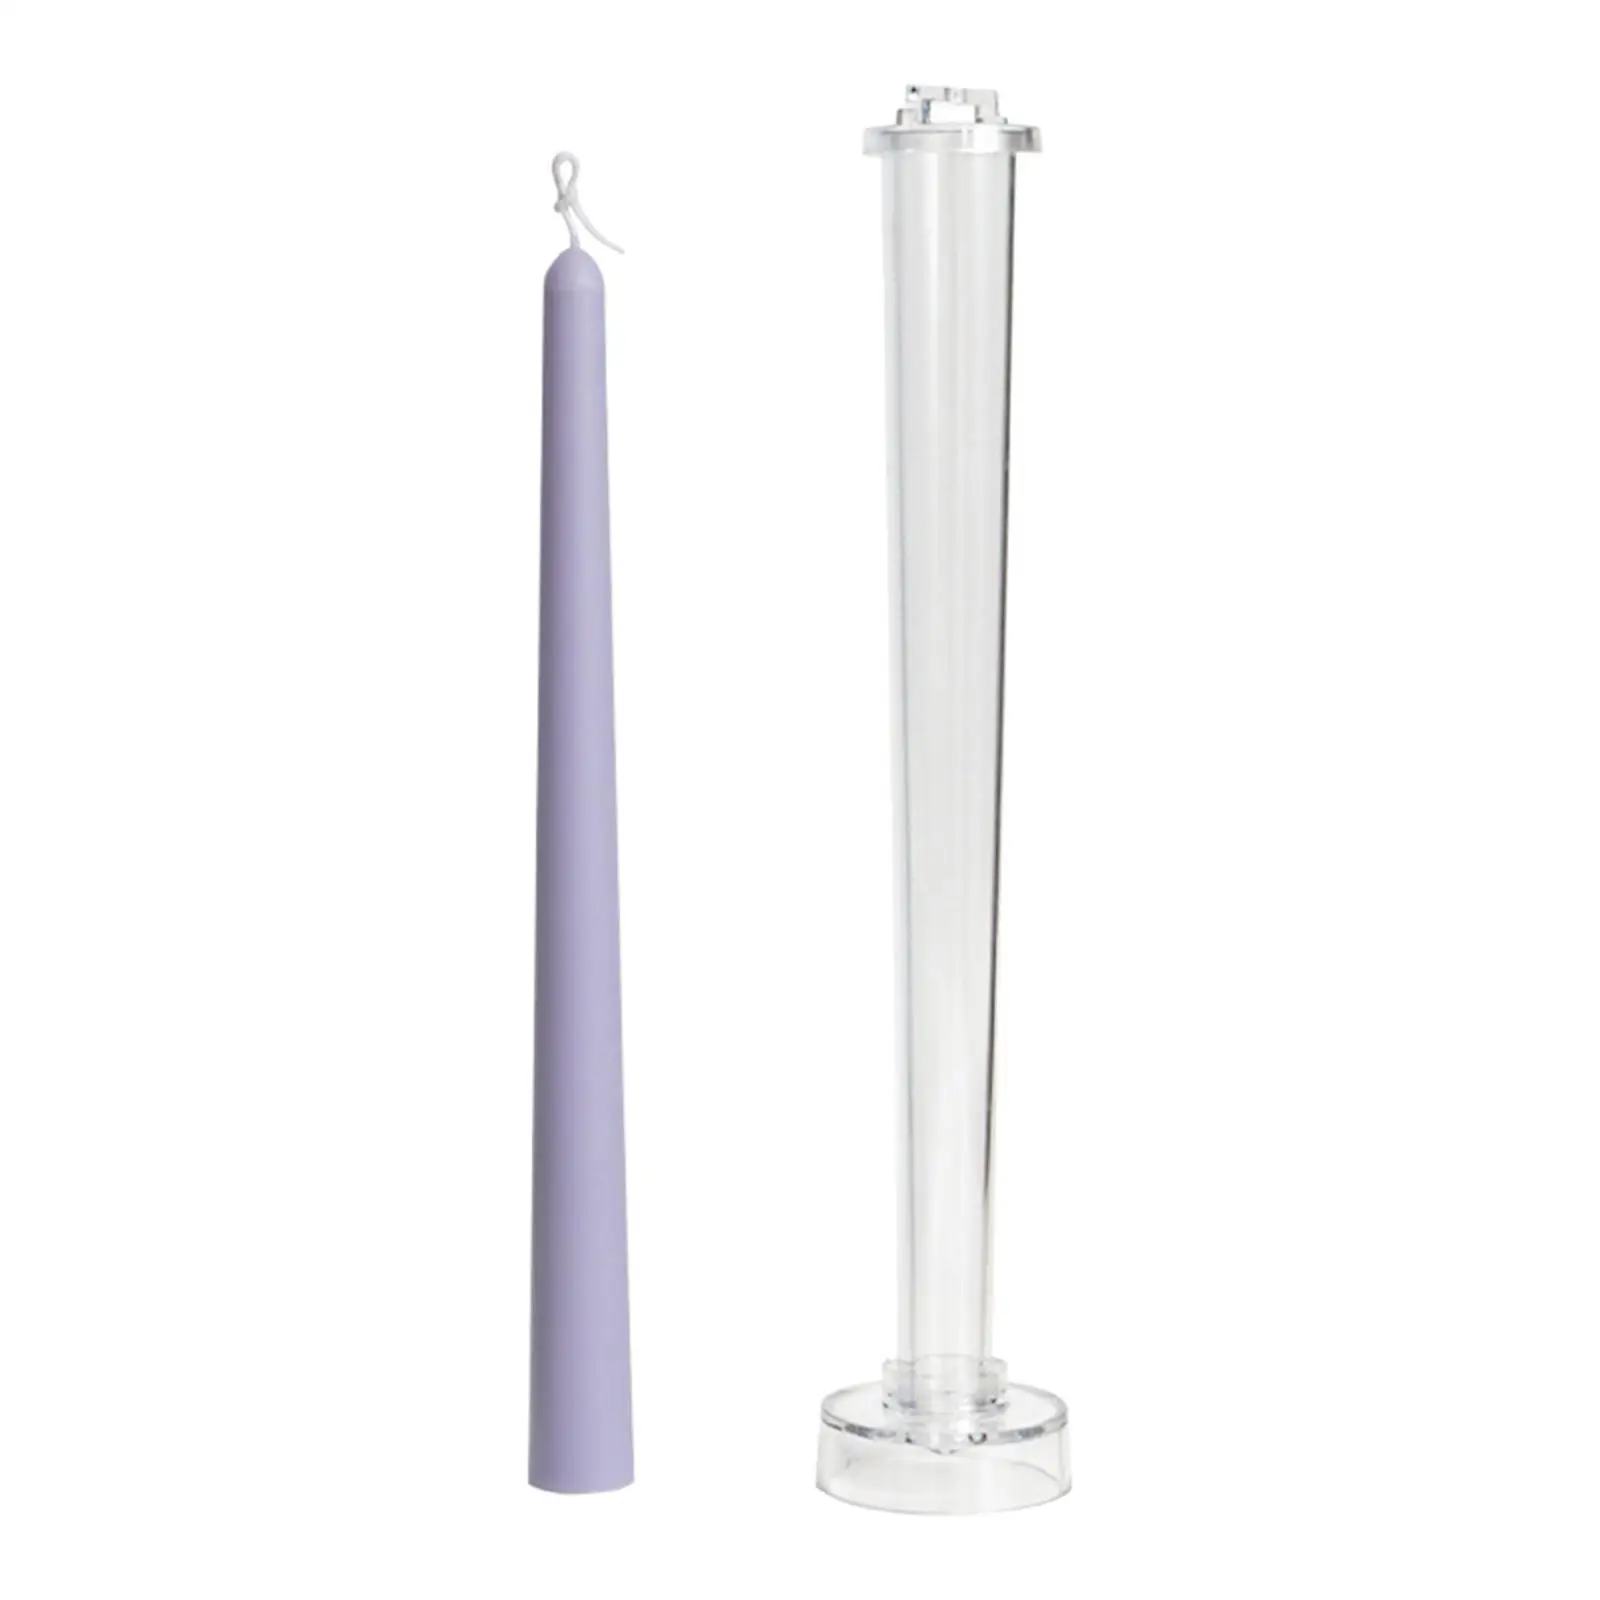 Candle Mold Candle Making Molds Taper Candles Mould for Church Soap Making